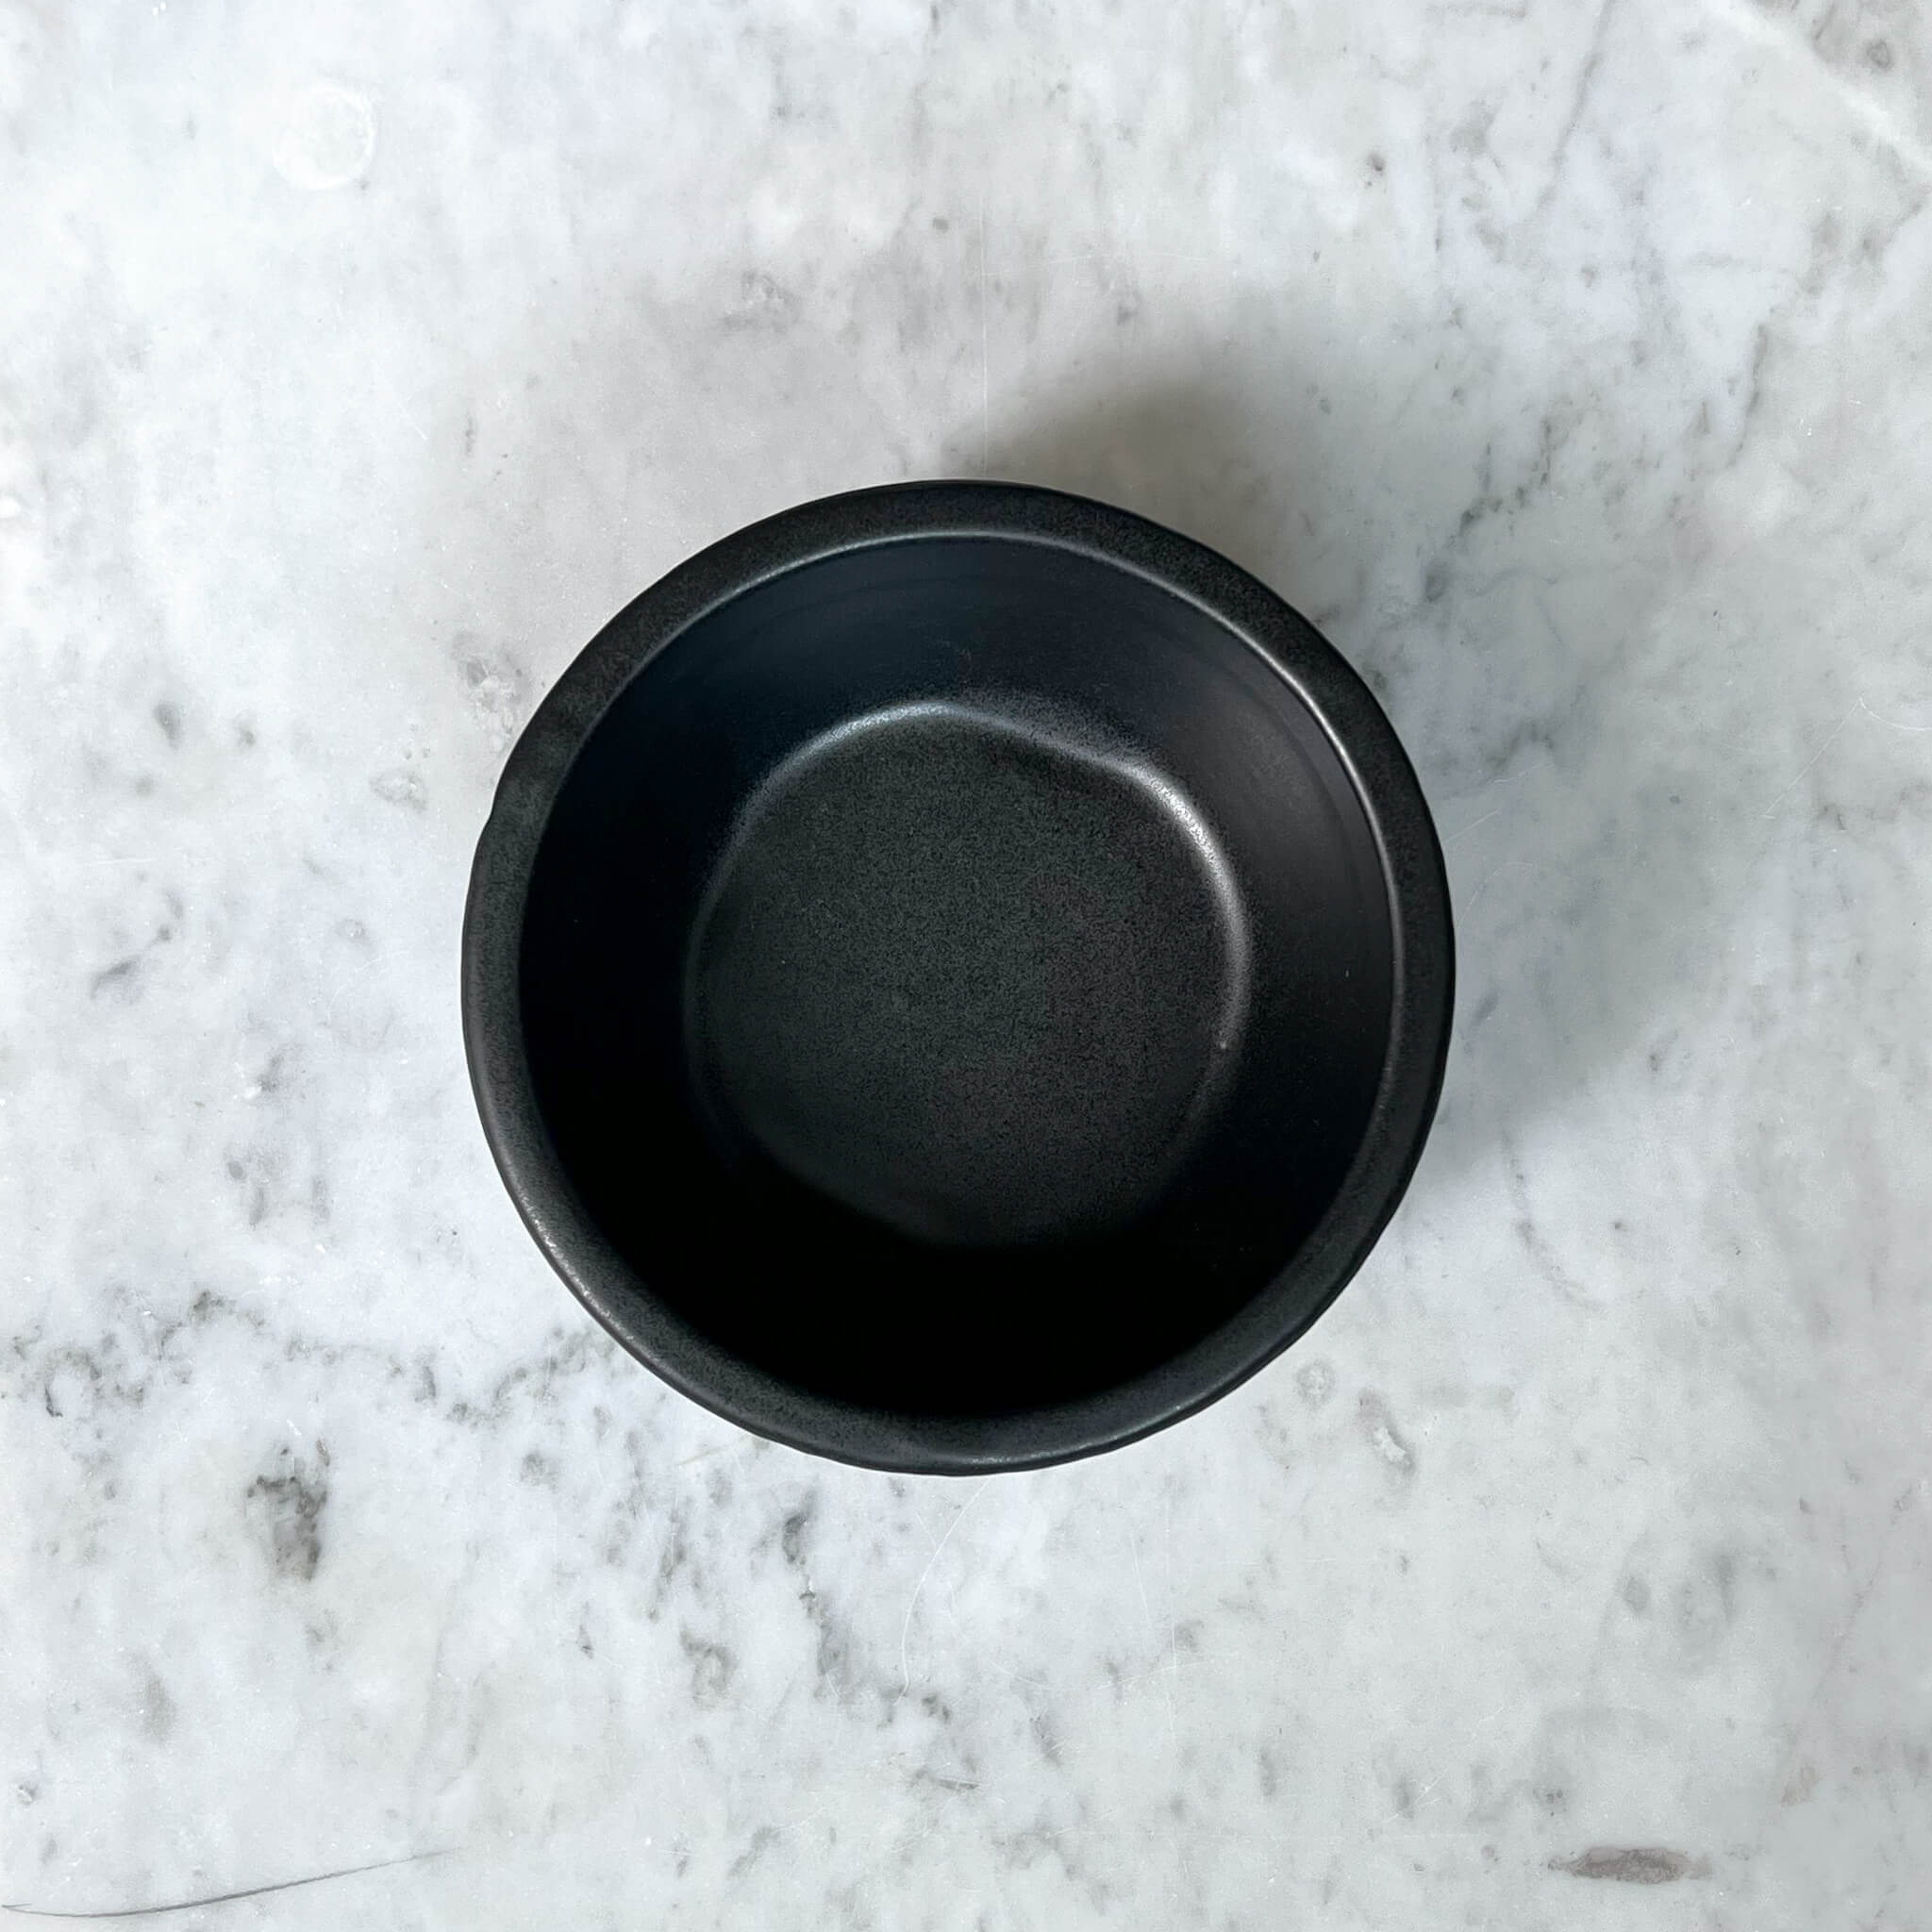 A ceramic molcajete in black on a marble counter.